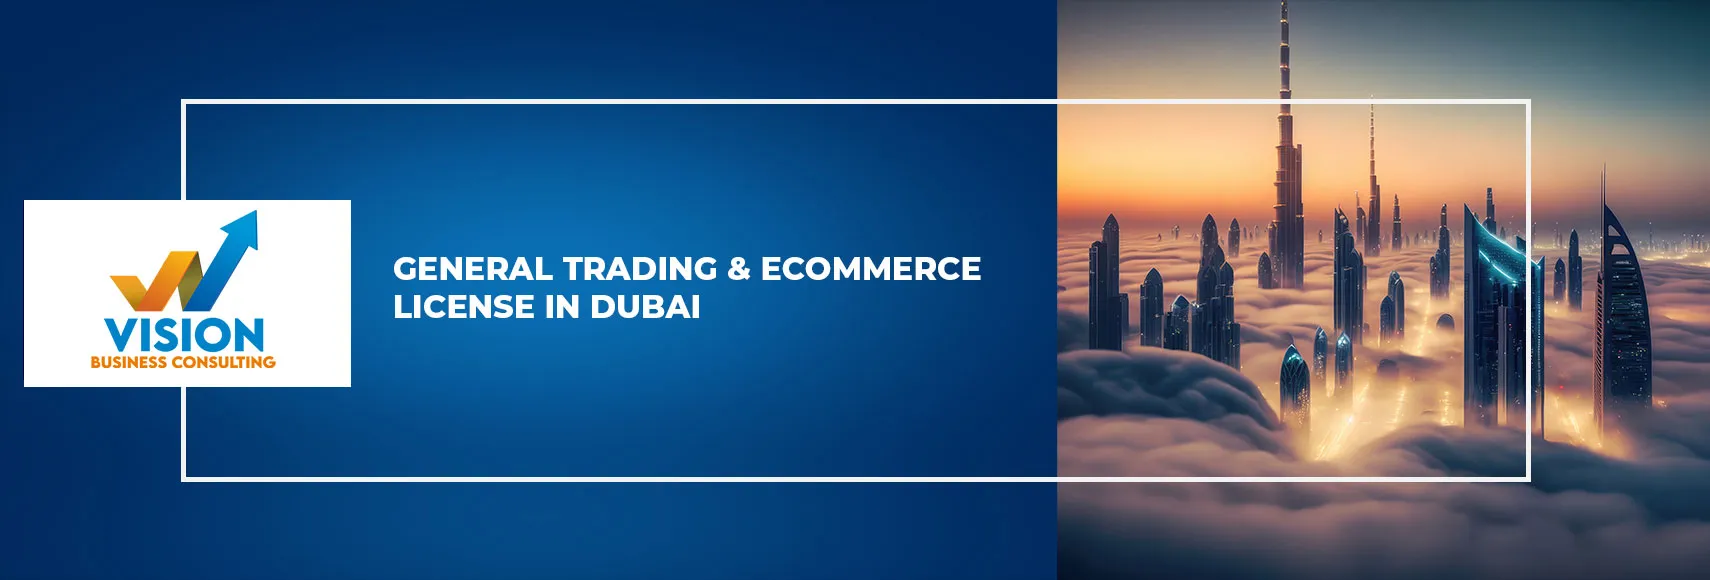 general trading license, ecommerce license in dubai, general trading in dubai